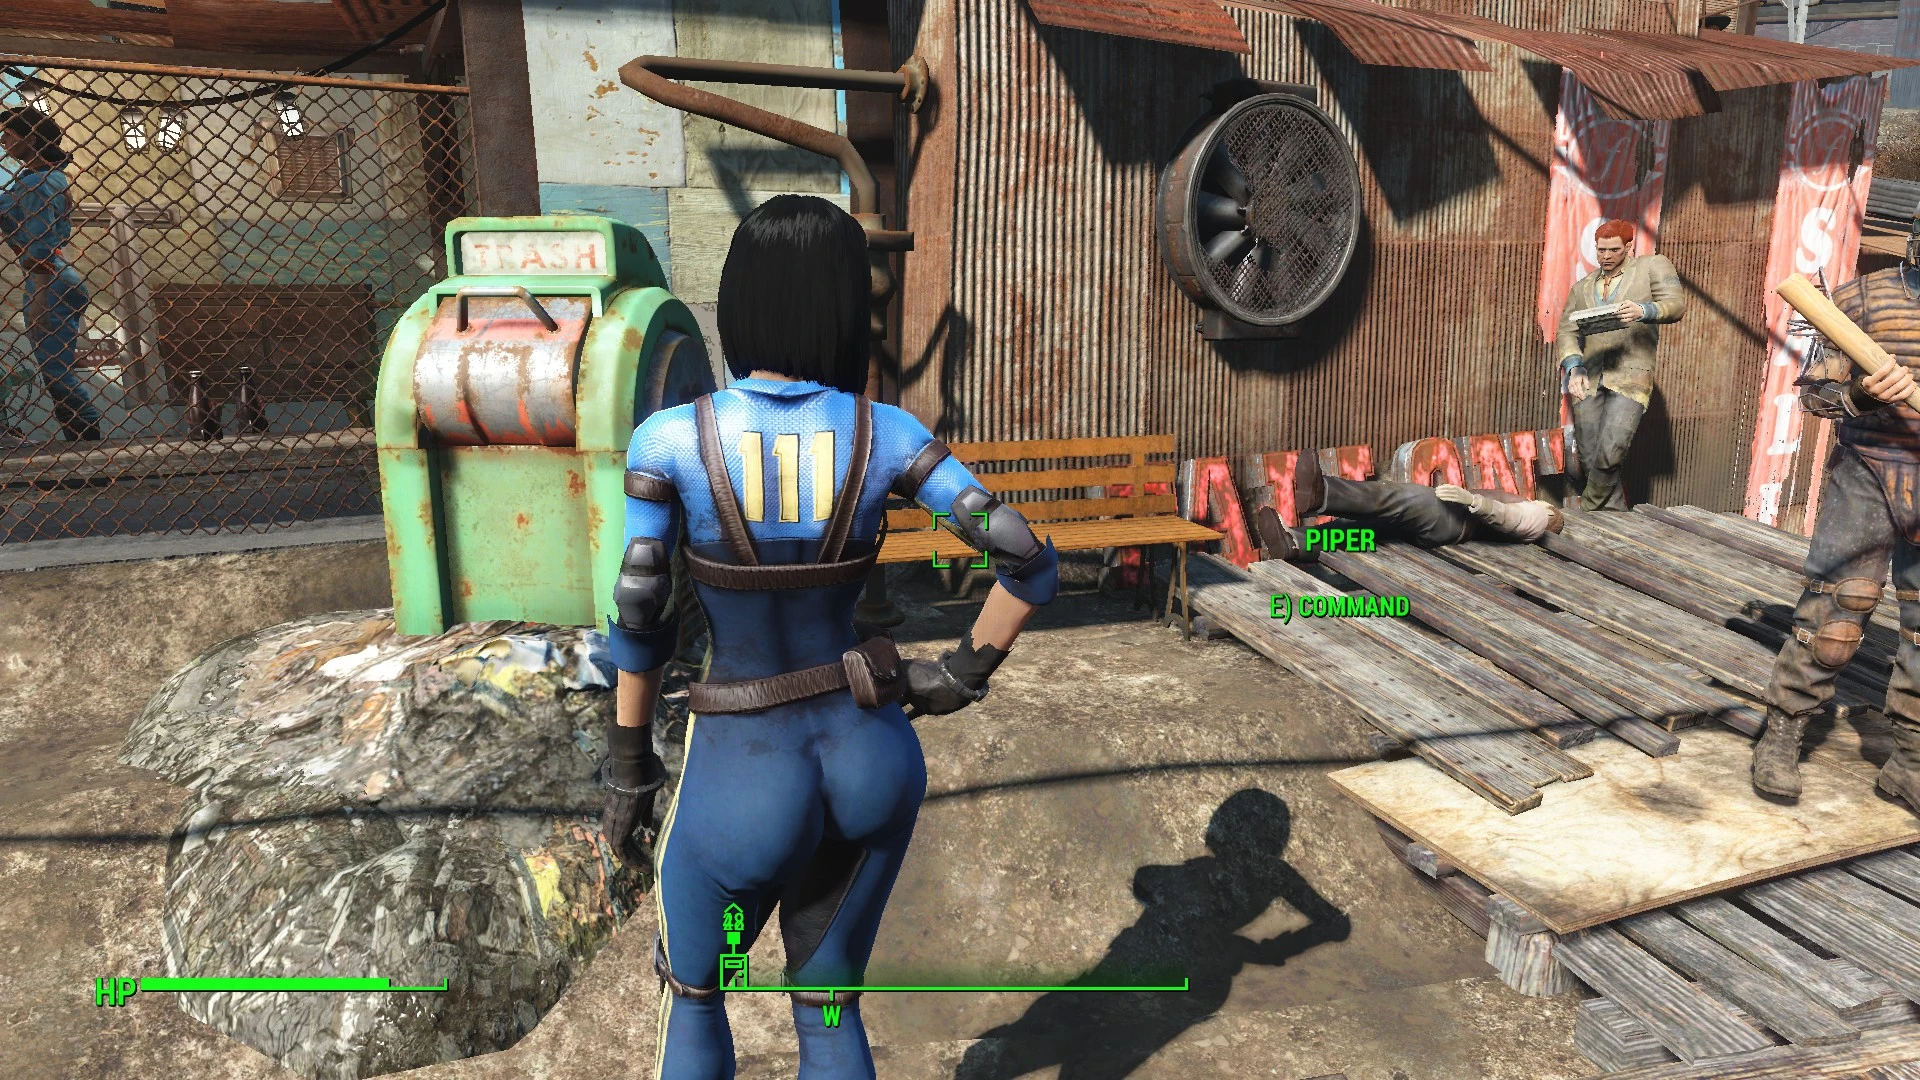 Piper S Vault Meat Cosplay 4 At Fallout 4 Nexus Mods And Community